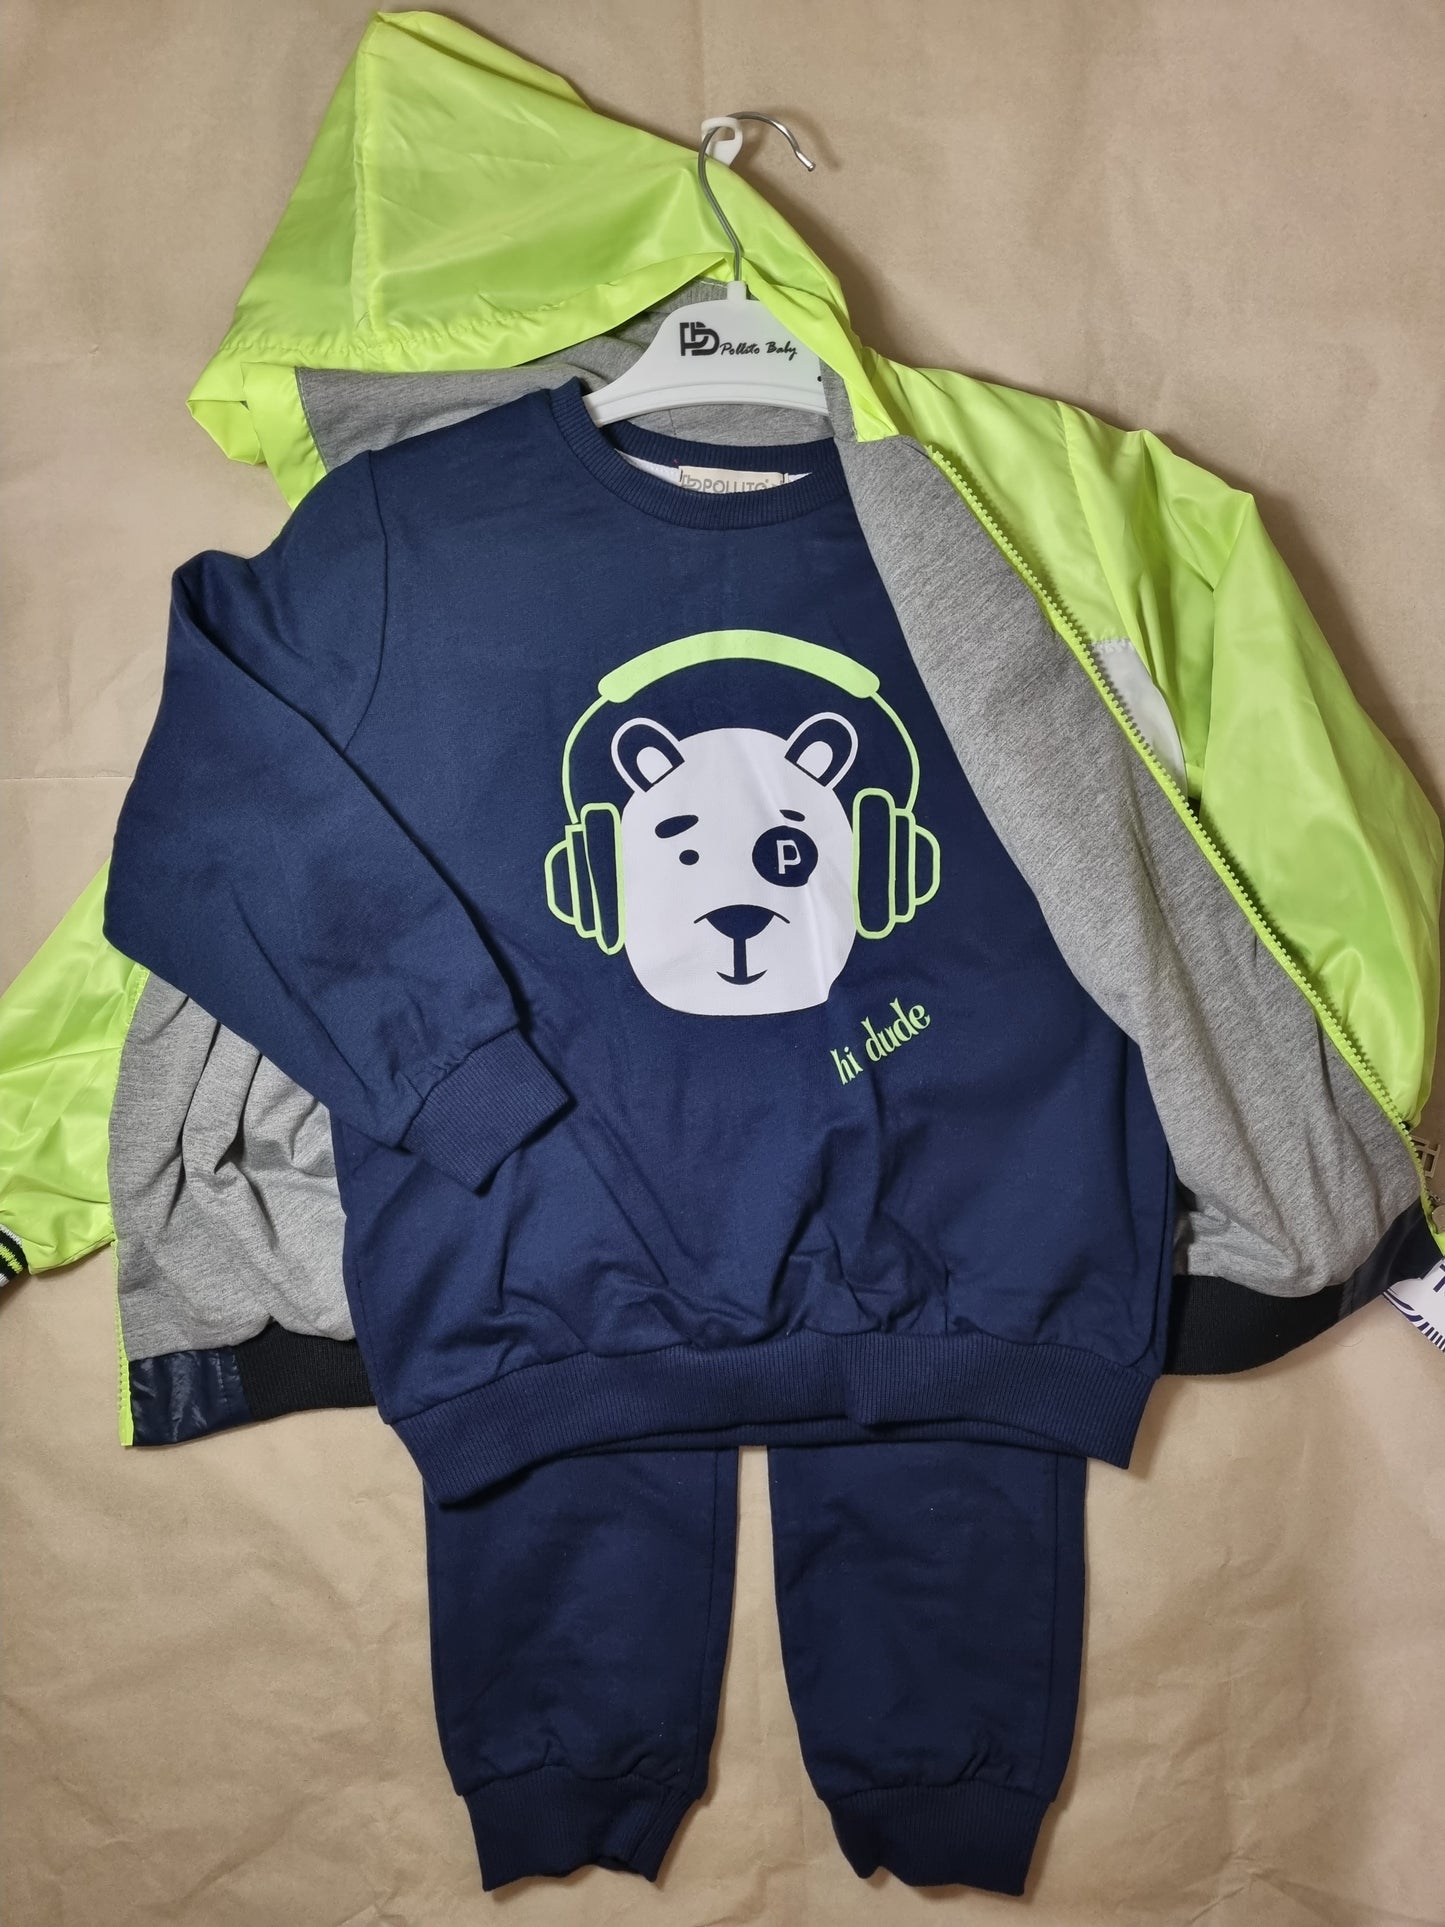 Long-sleeved sports Set for a boy